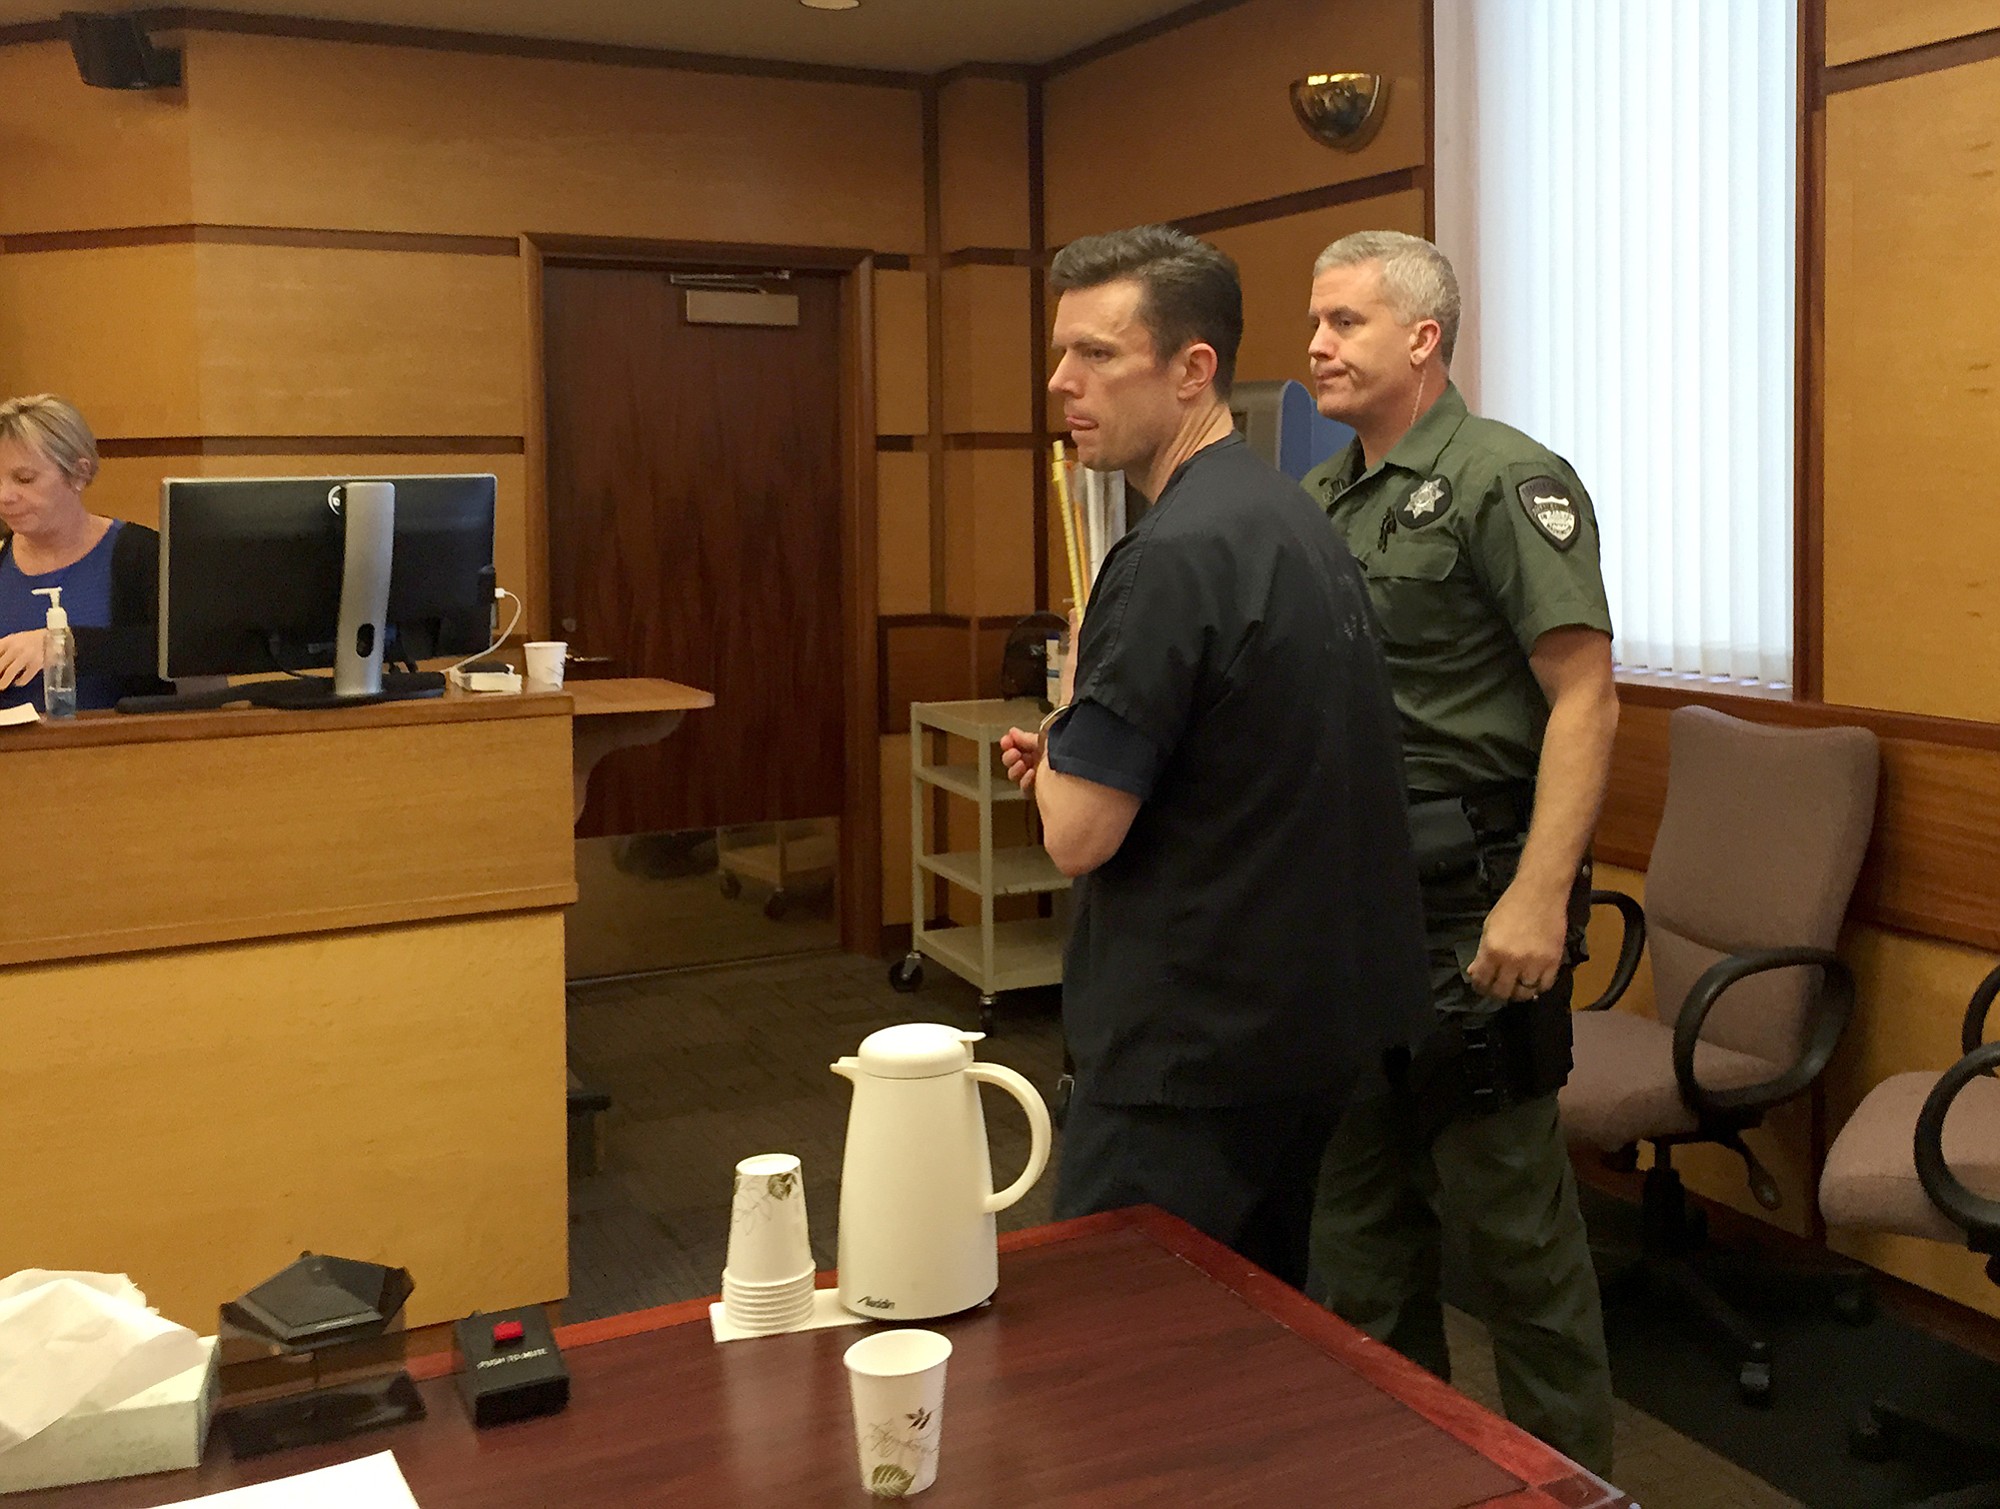 Paris Achen/The Columbian
John Garrett Smith is escorted out of a Clark County courtroom Wednesday after Superior Court Judge Robert Lewis found him guilty of second-degree attempted murder.